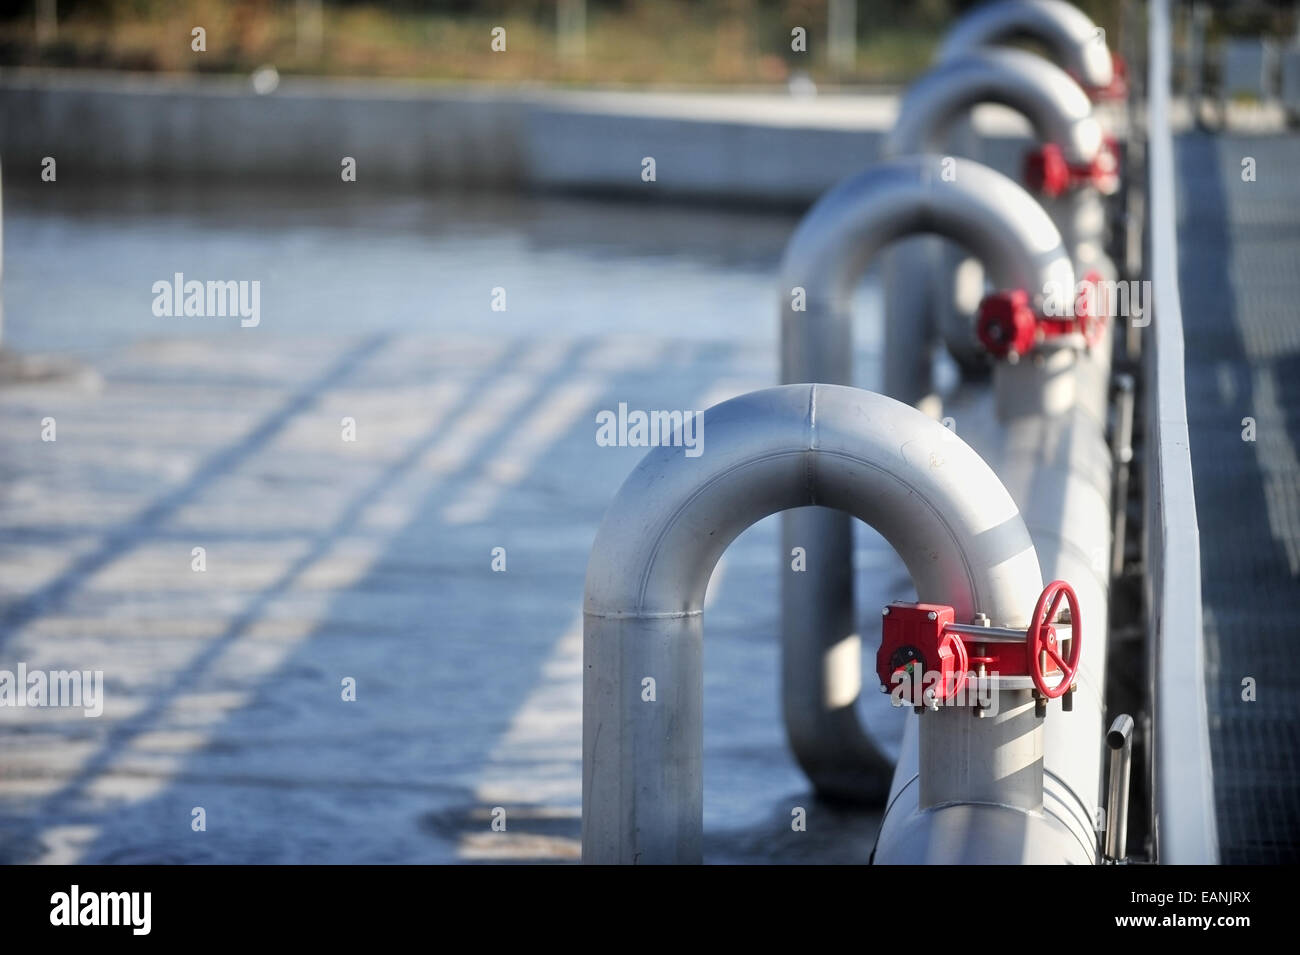 Industrial pipes from a waste water treatment plant Stock Photo